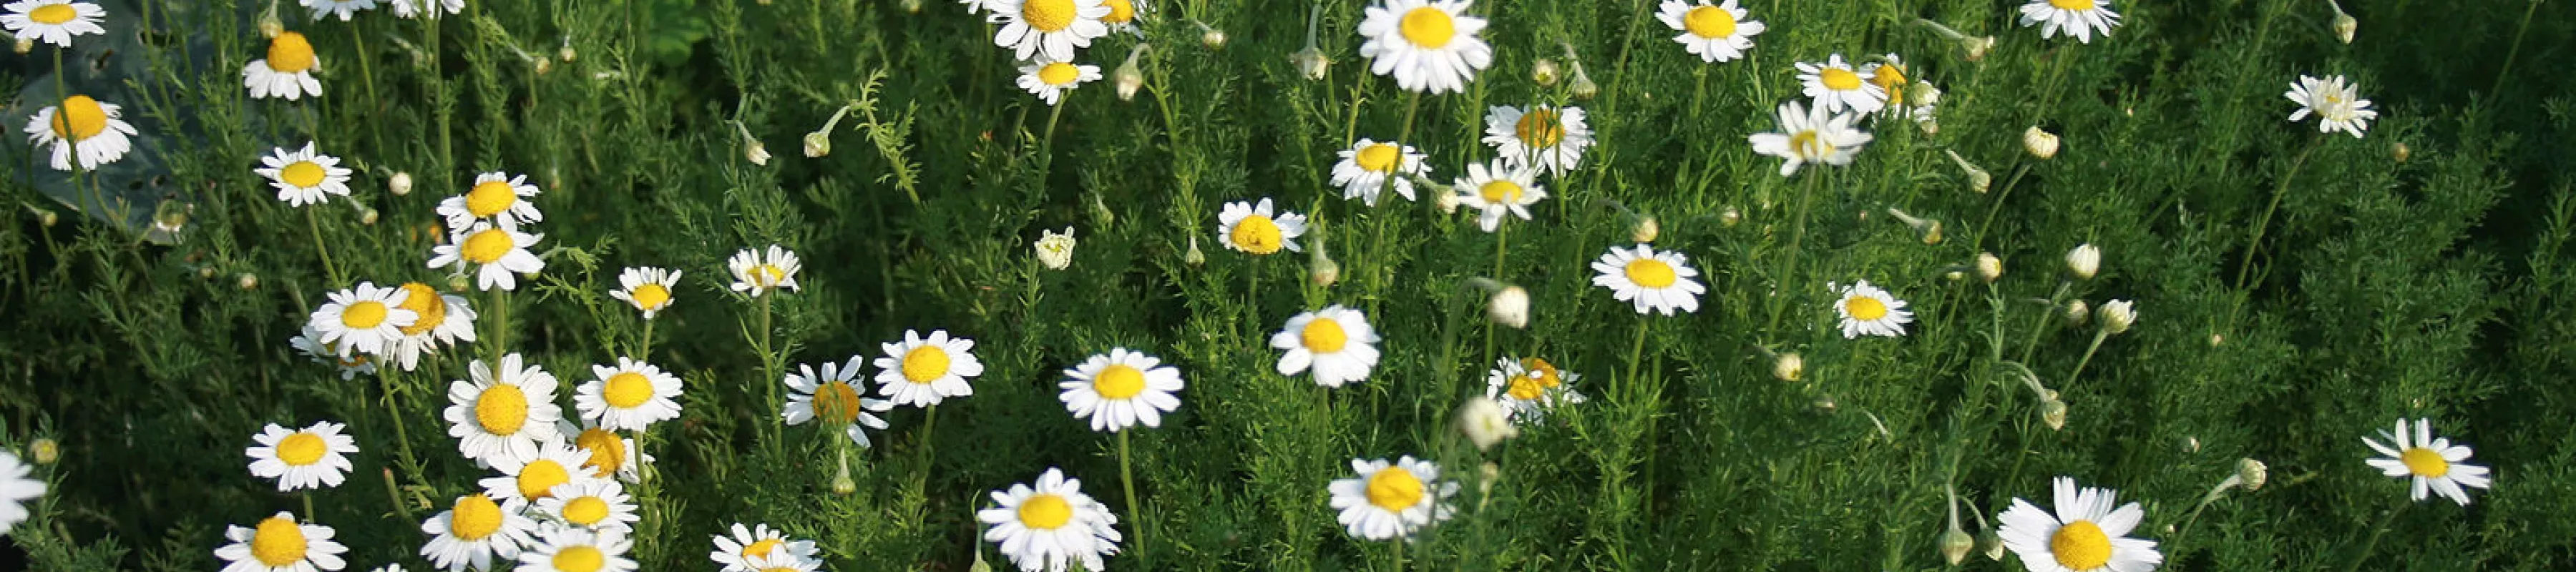 Finely divided, green leaves and white, daisy-like flowers with a yellow centre of chamomile plants.